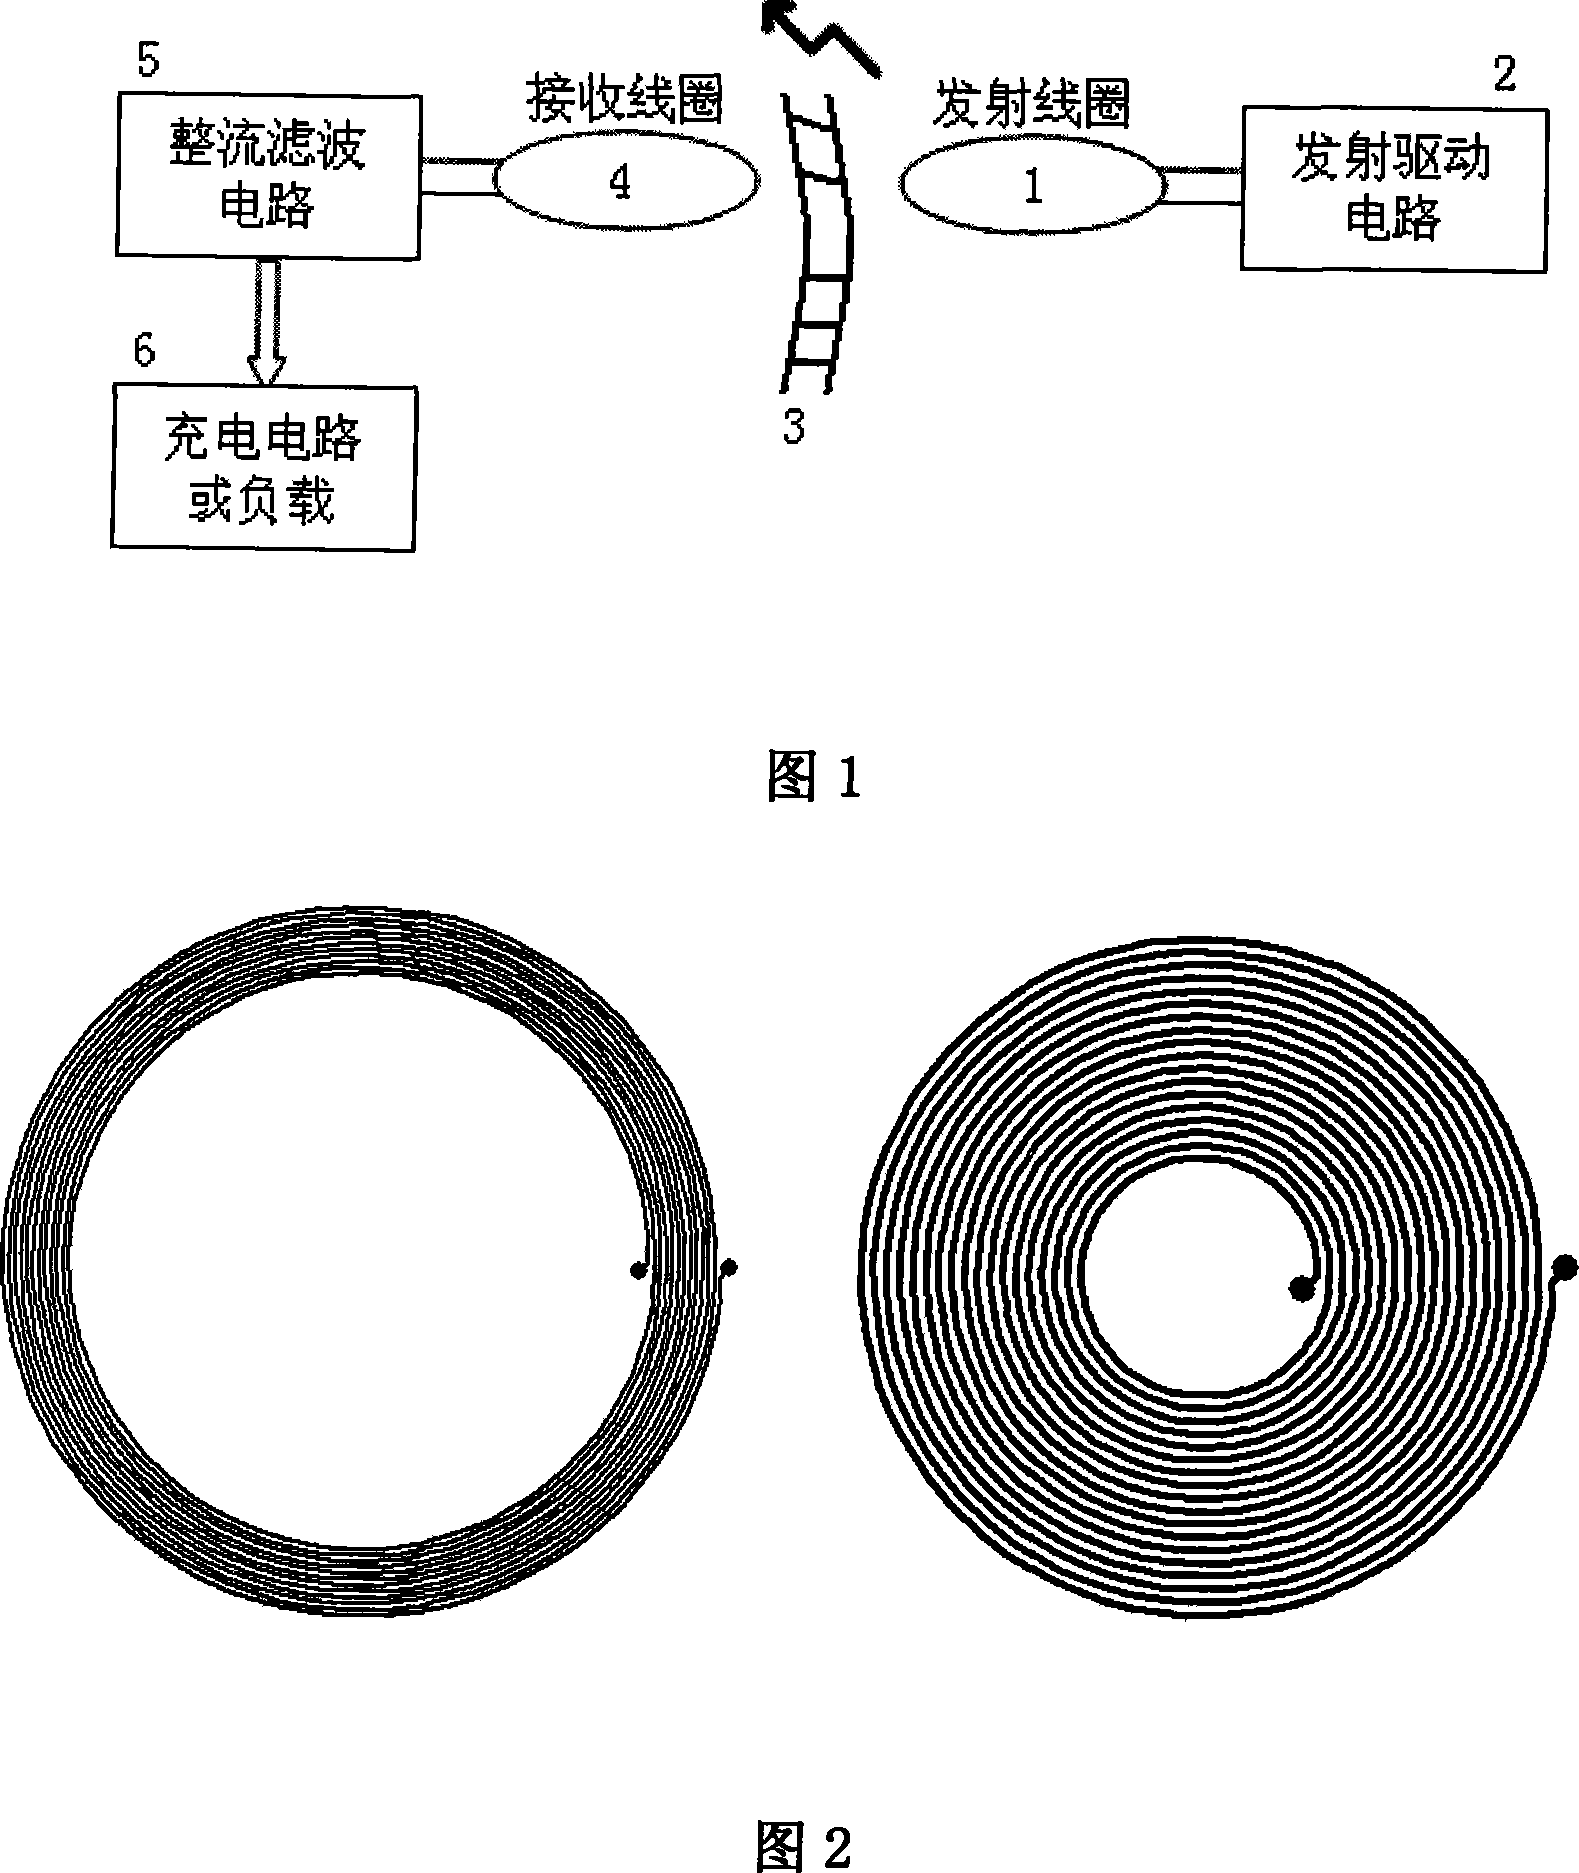 Electromagnetic induction energy supplying device for implantation type medical equipment